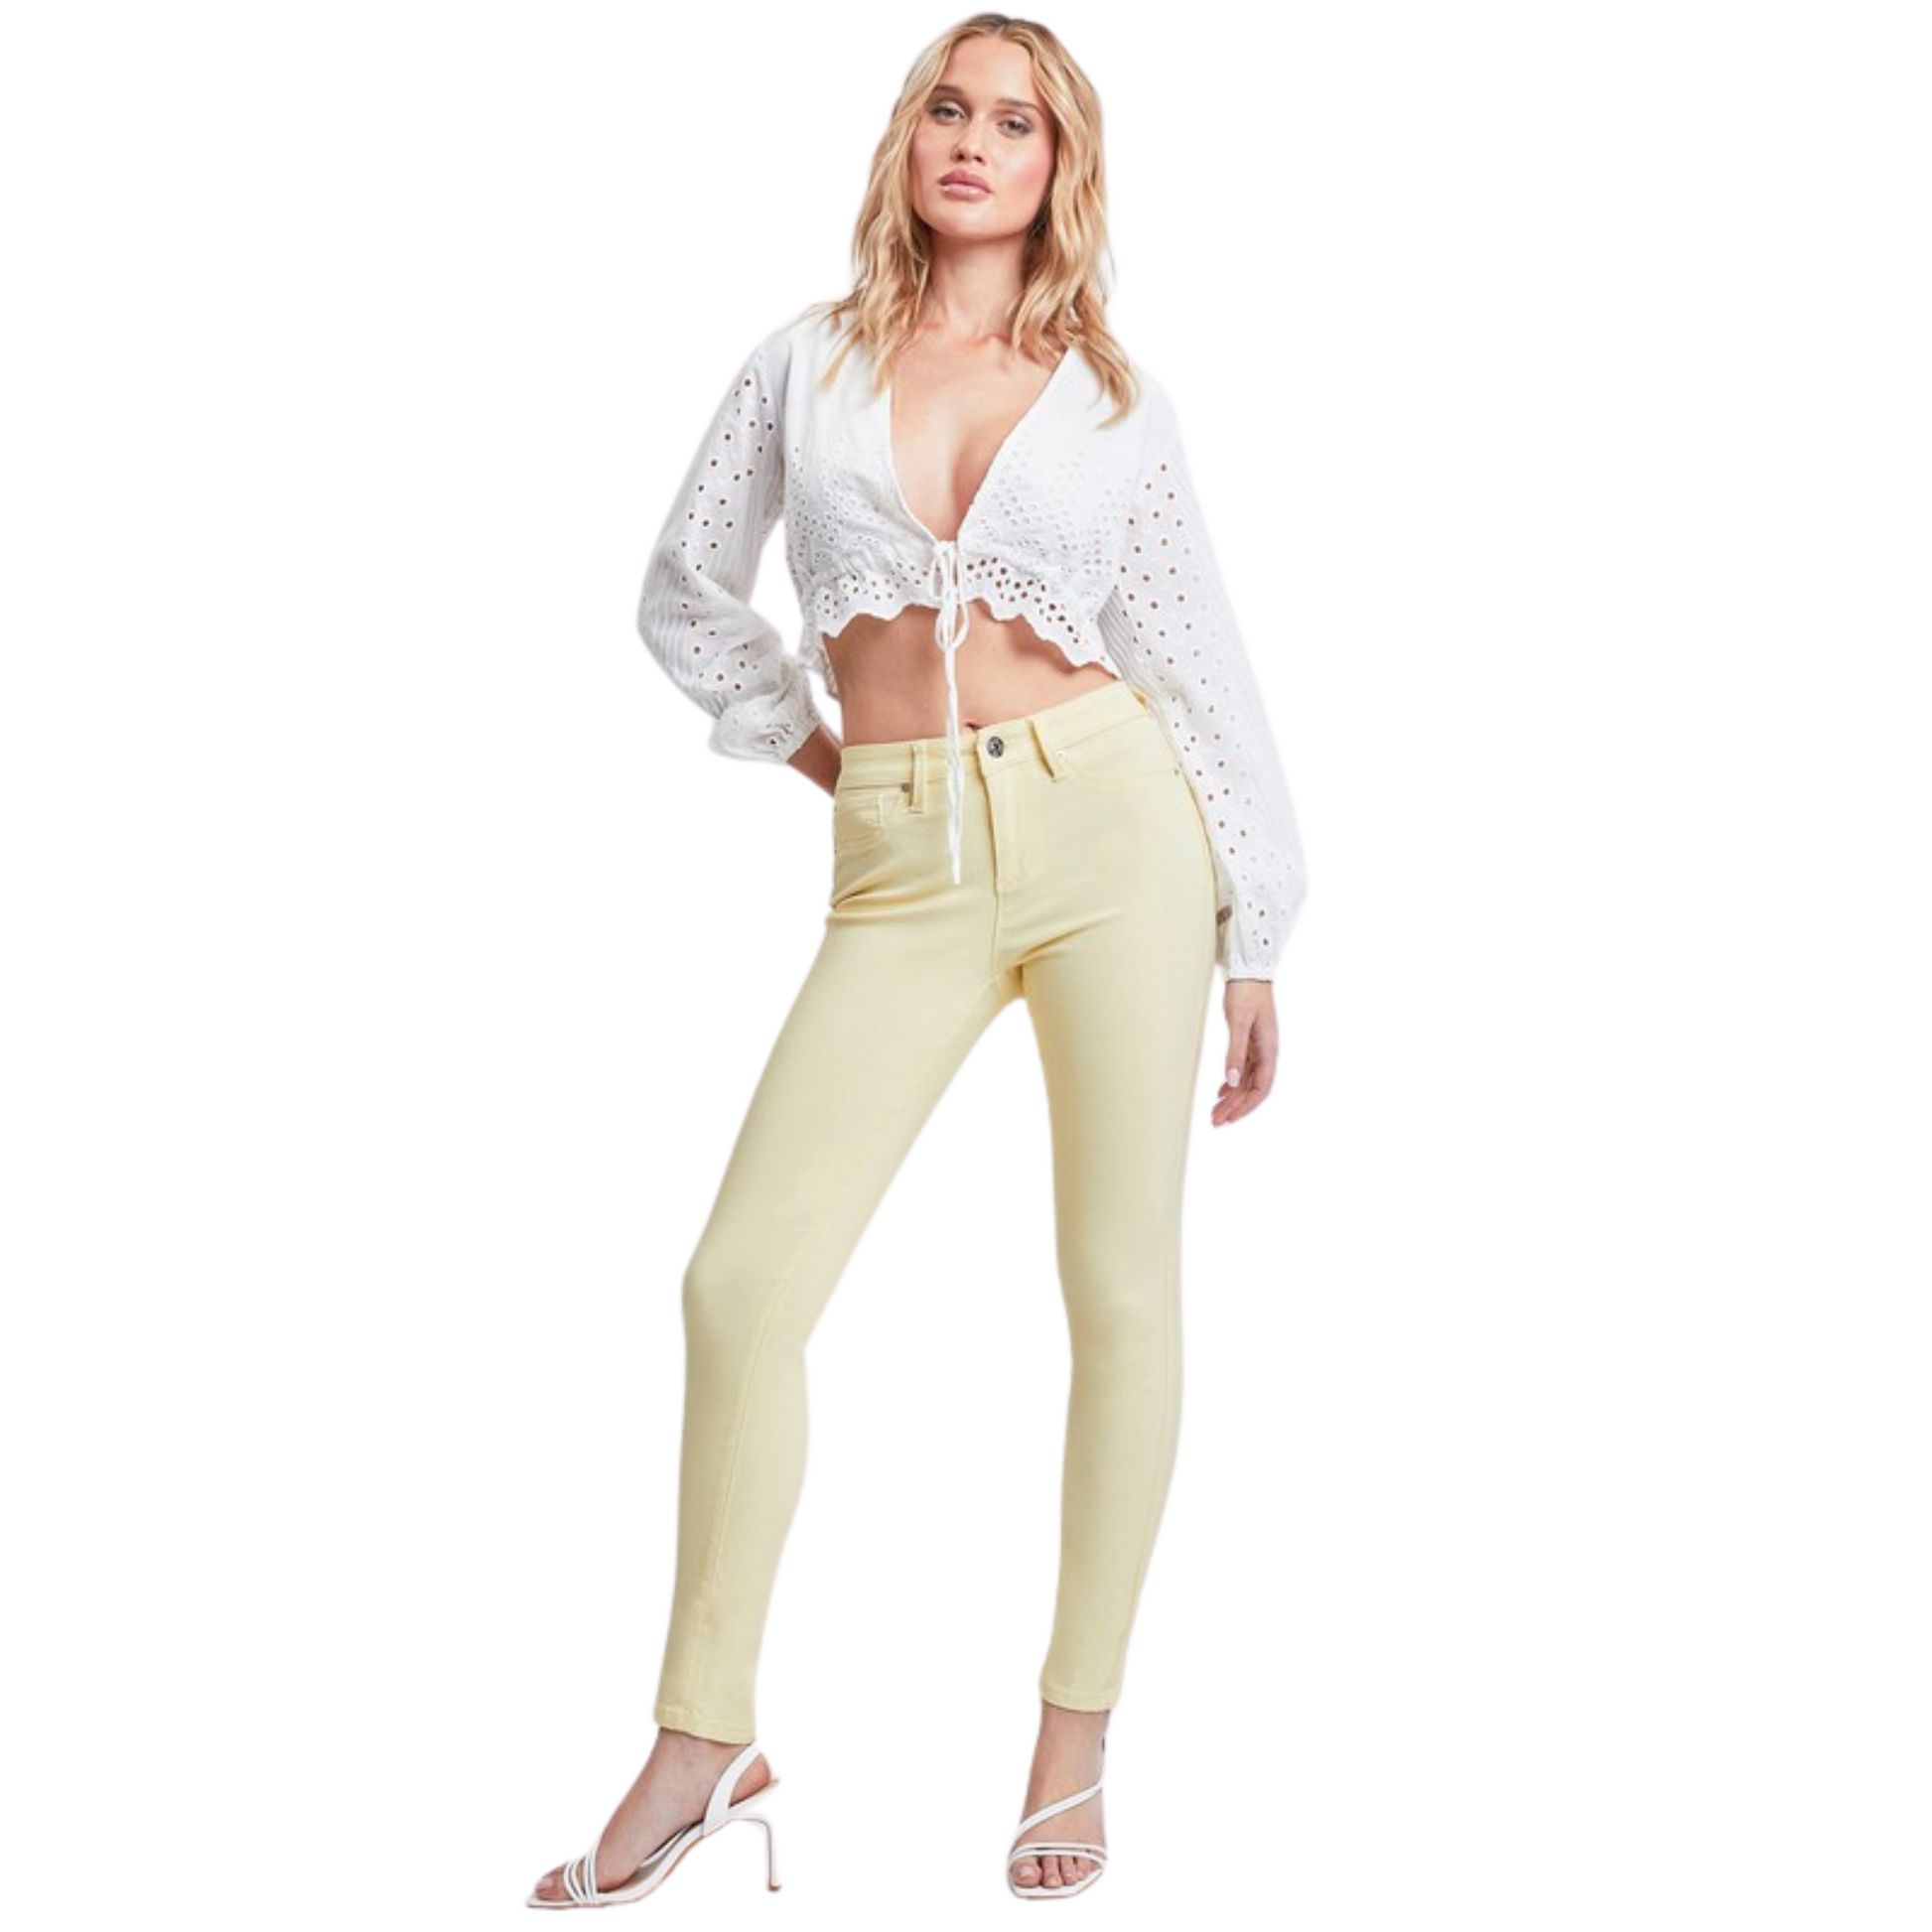 Our Hyper stretch Mid Rise Skinny Jeans are made from a super-stretchy fabric, allowing you the perfect fit without ever compromising your comfort. With a variety of colors available, these jeans provide a stylish and versatile option for your wardrobe. The mid-rise waist gives you a comfortable, flattering fit.